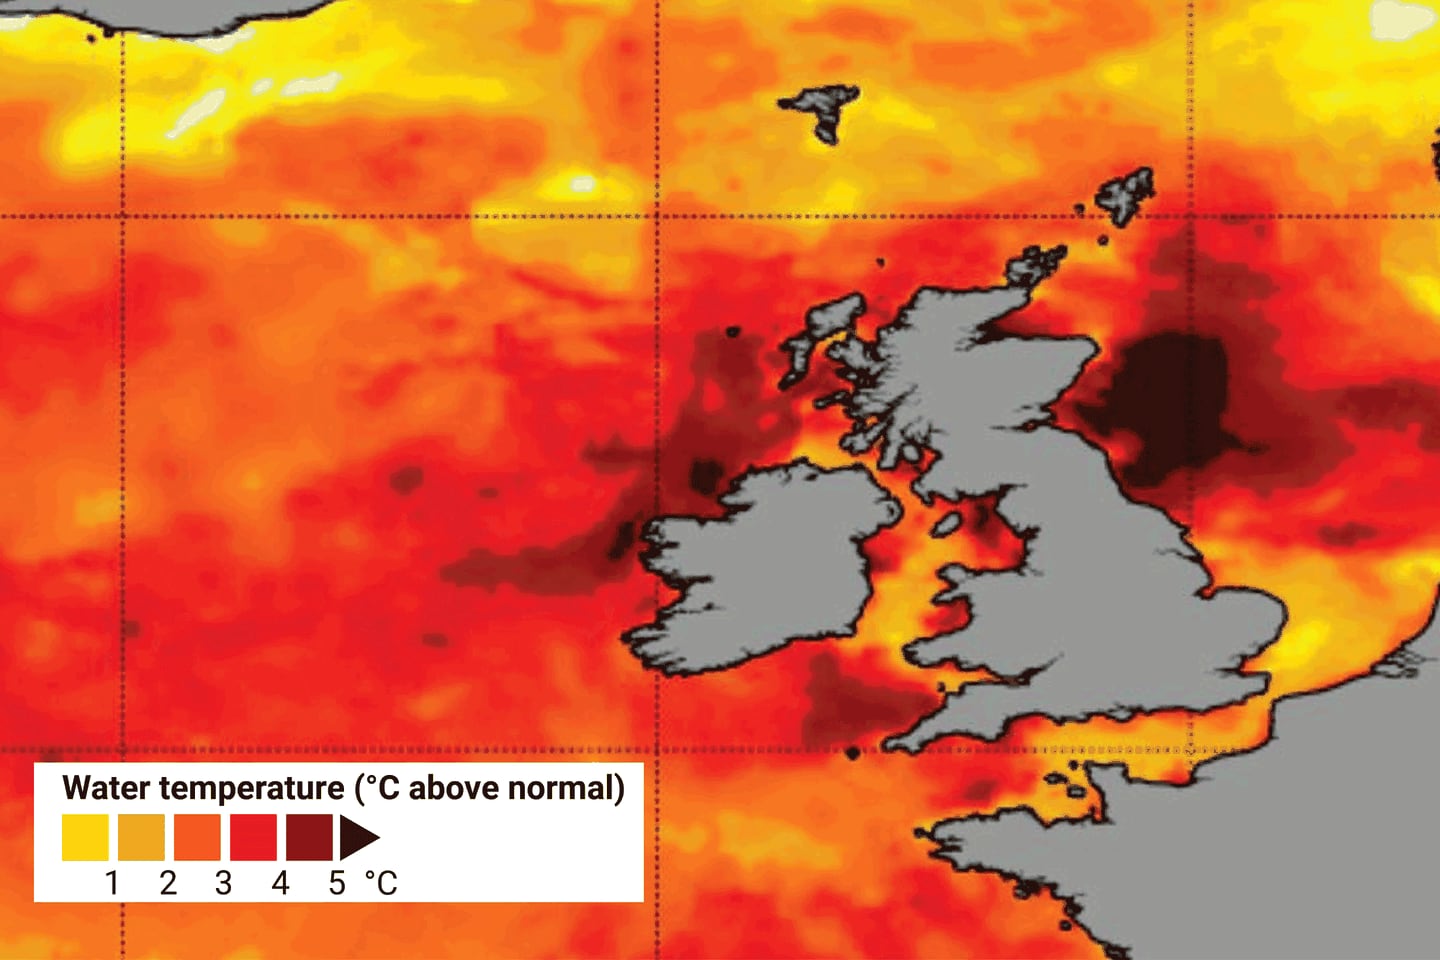 Temperatures in the oceans around Ireland and the UK are between 3 and 5 degrees higher than normal: Graphic: National Oceanic and Atmospheric Administration (NOAA)